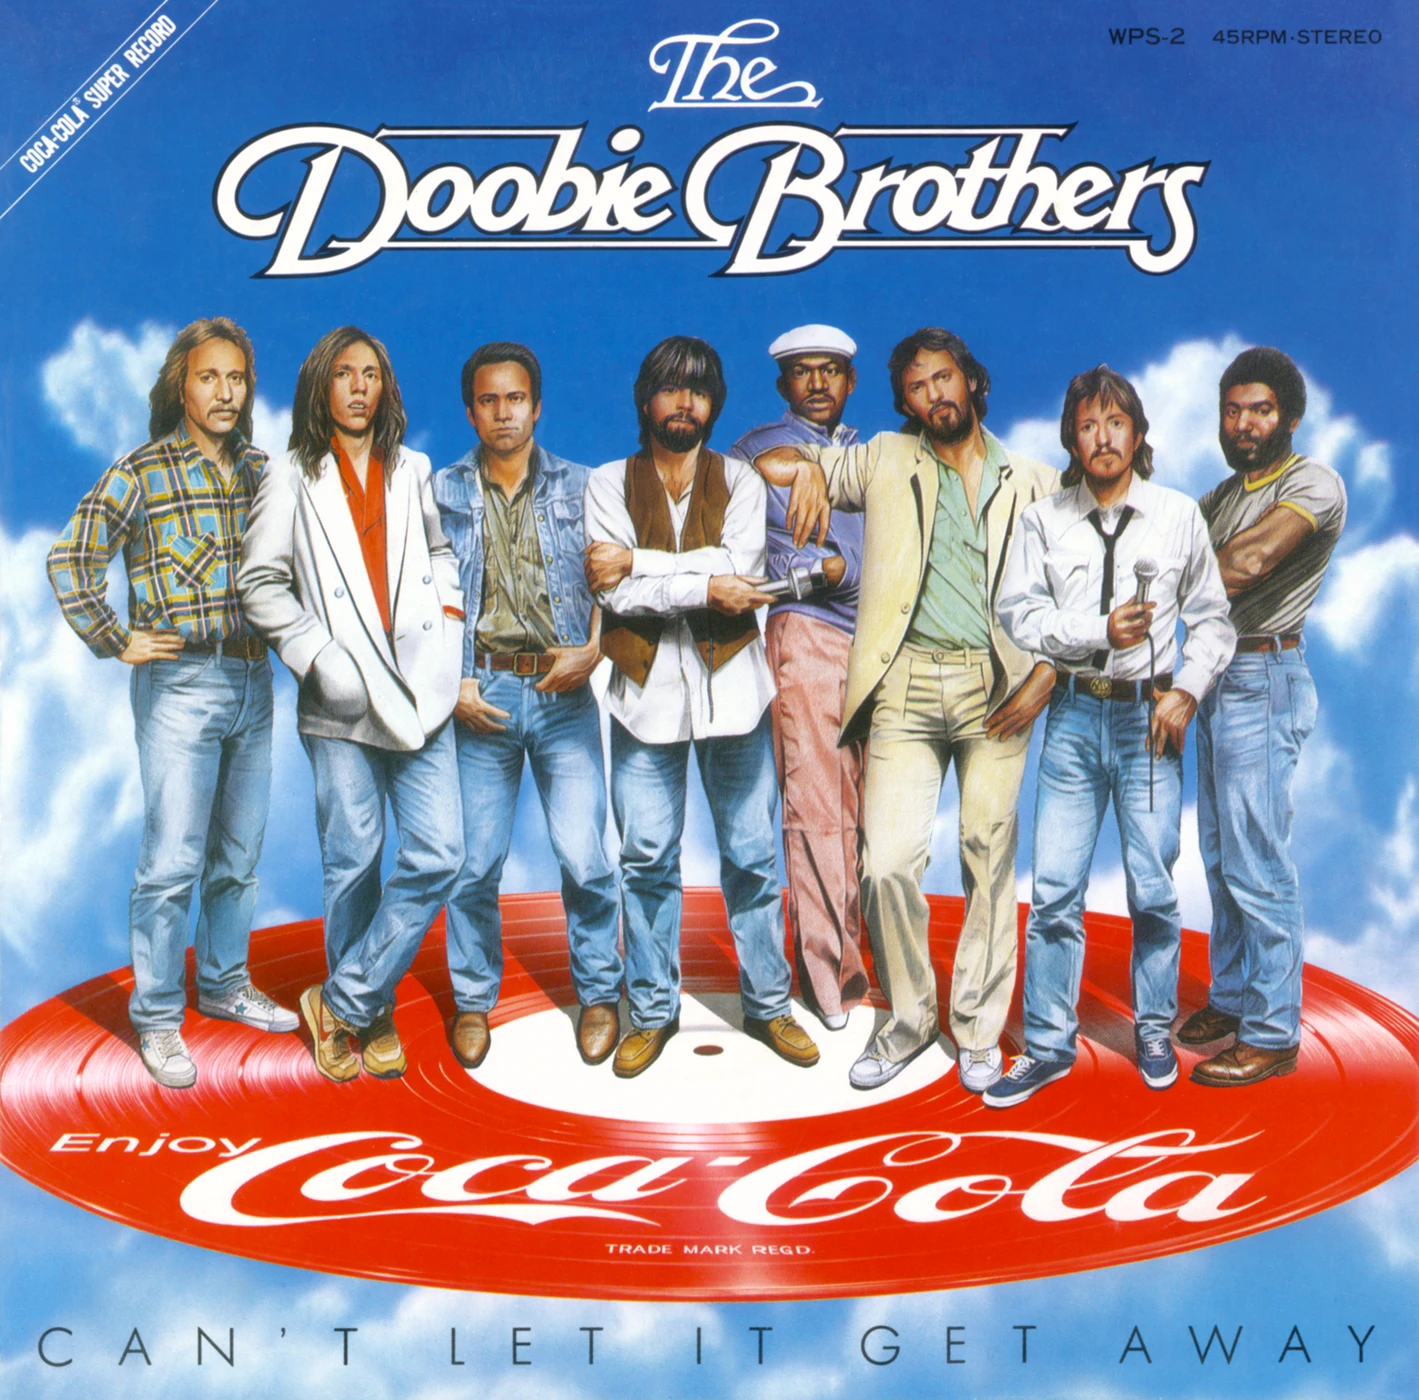 Can't Let It Get Away – The Doobie Brothers